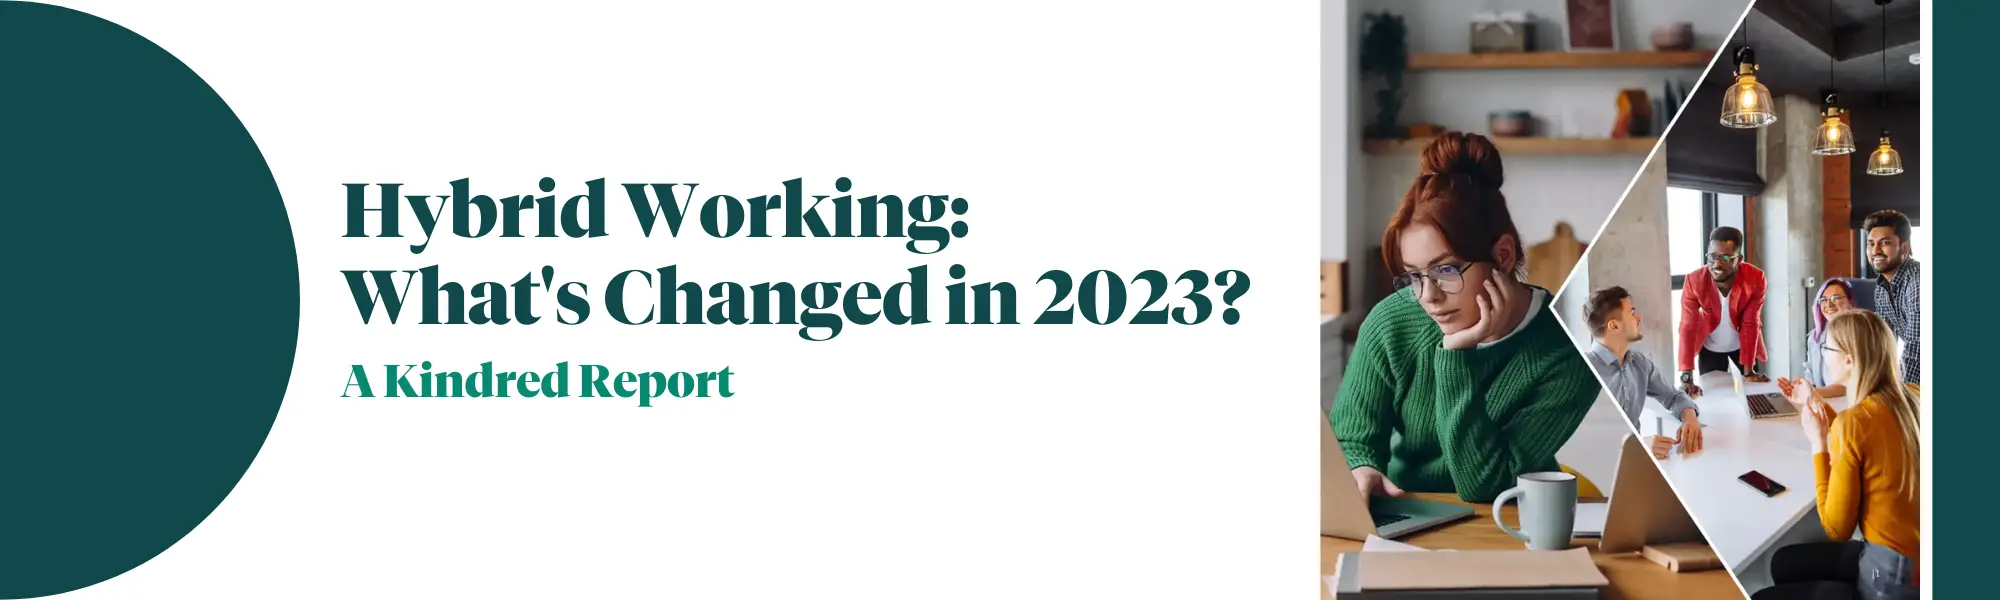 A graphic for the title of this article - "Hybrid Working What's Changed in 2023"